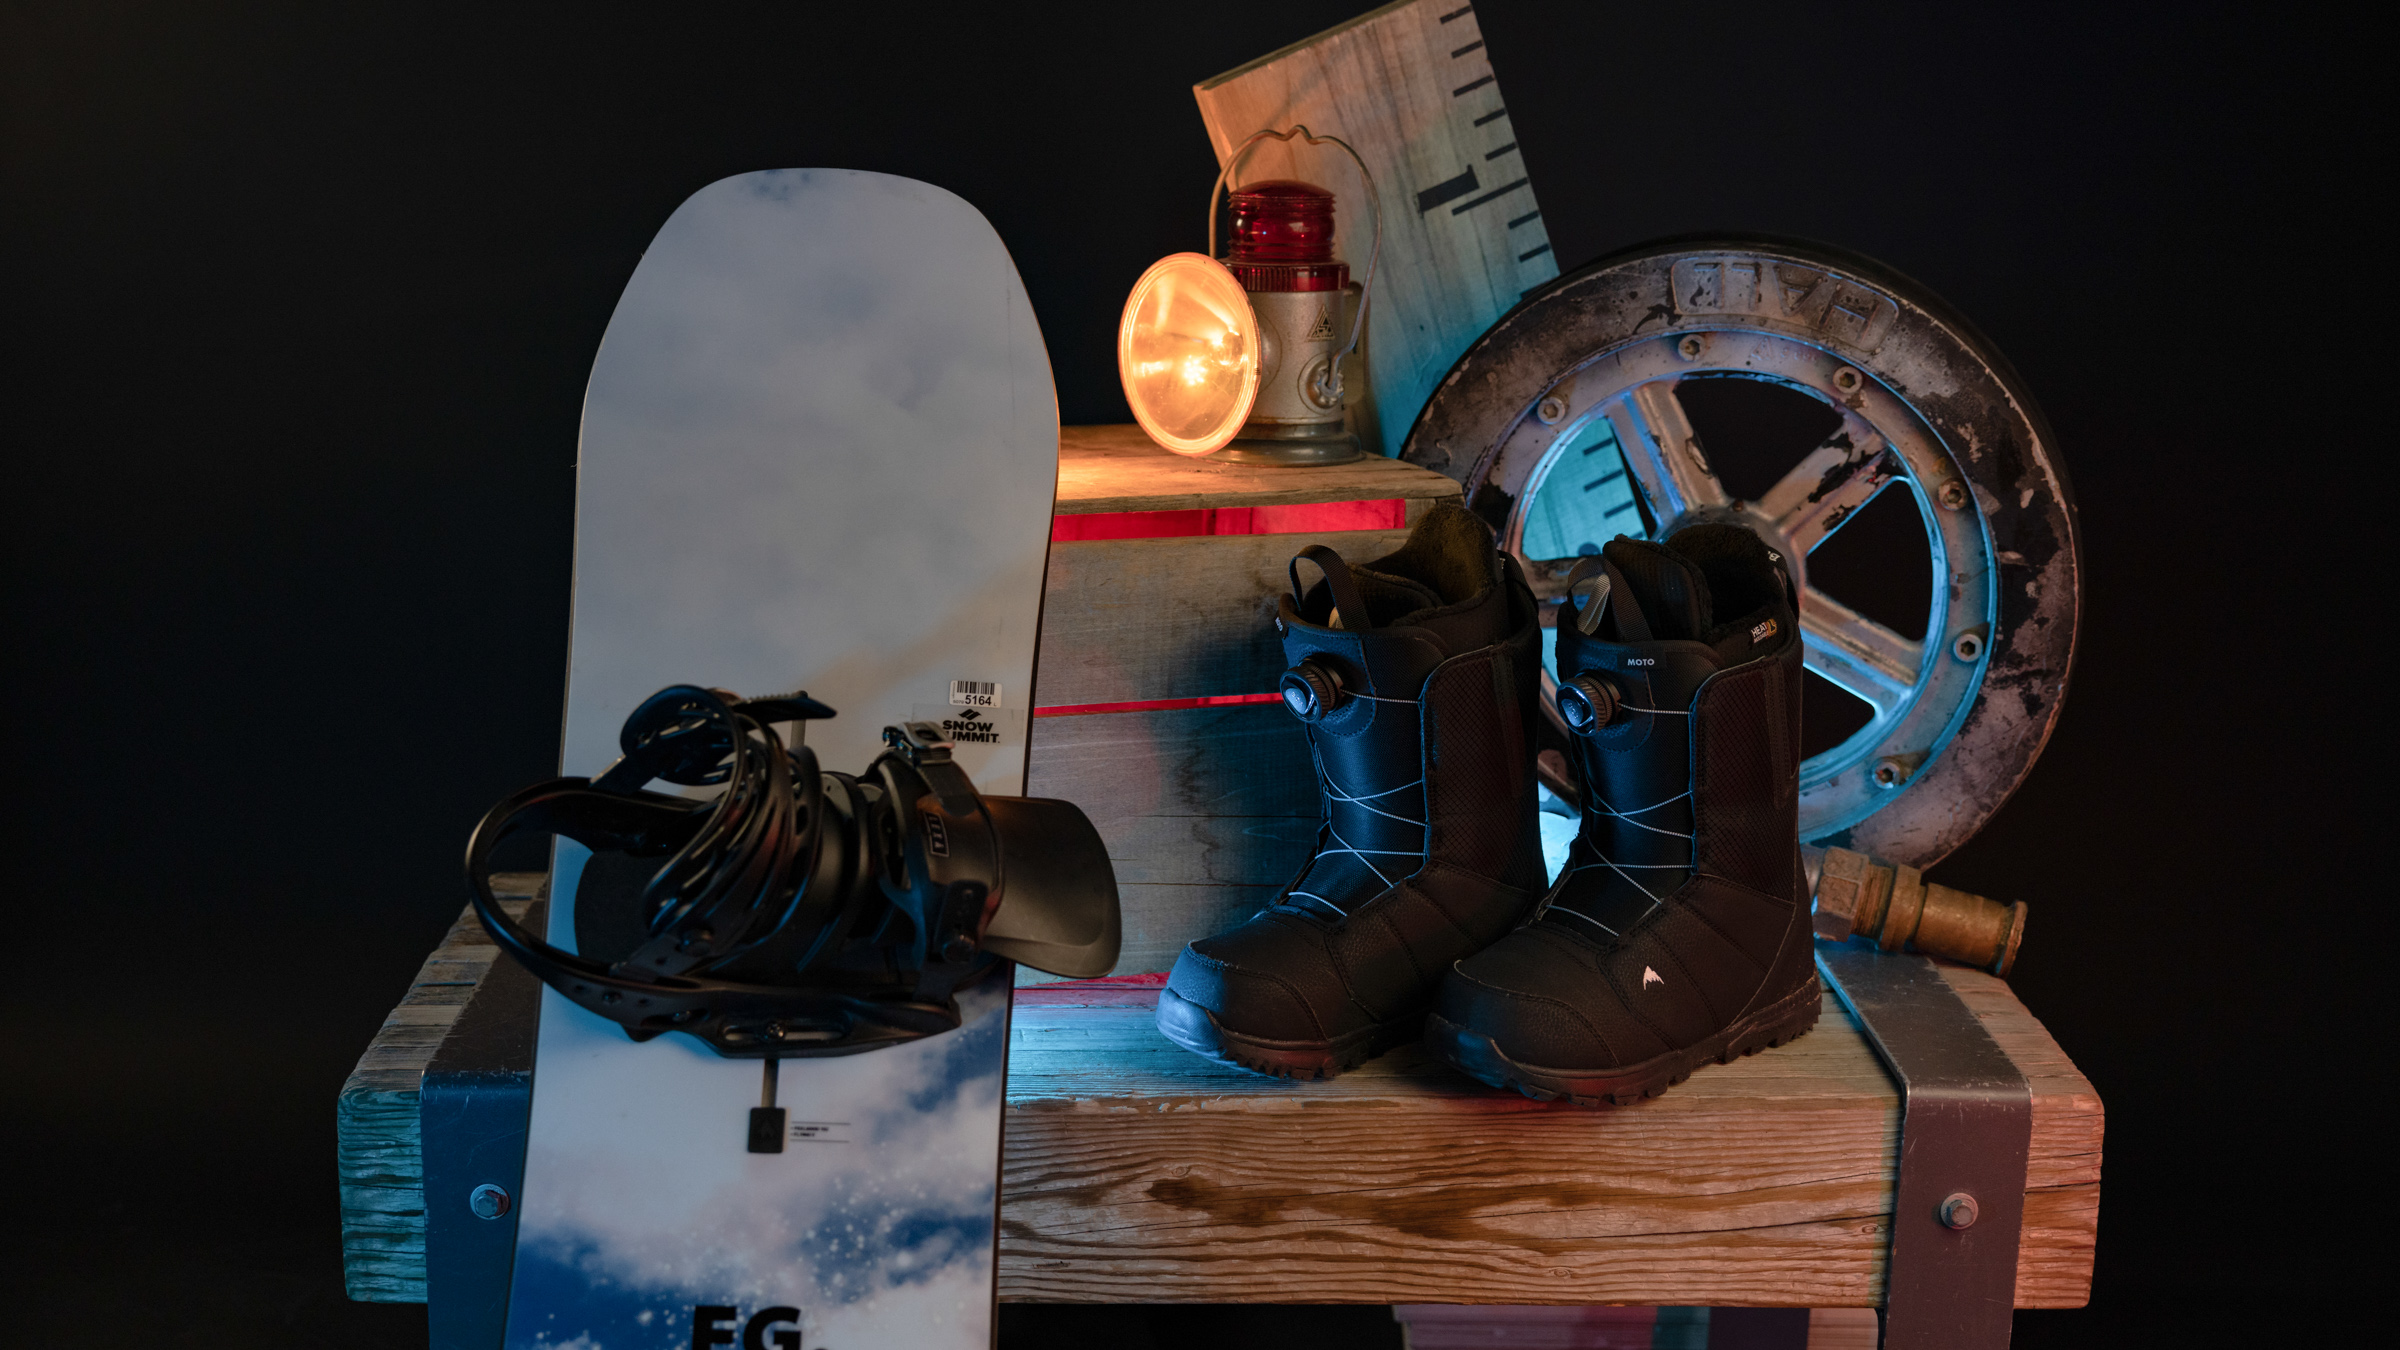 Snowboard with bindings and boots displayed against wooden box